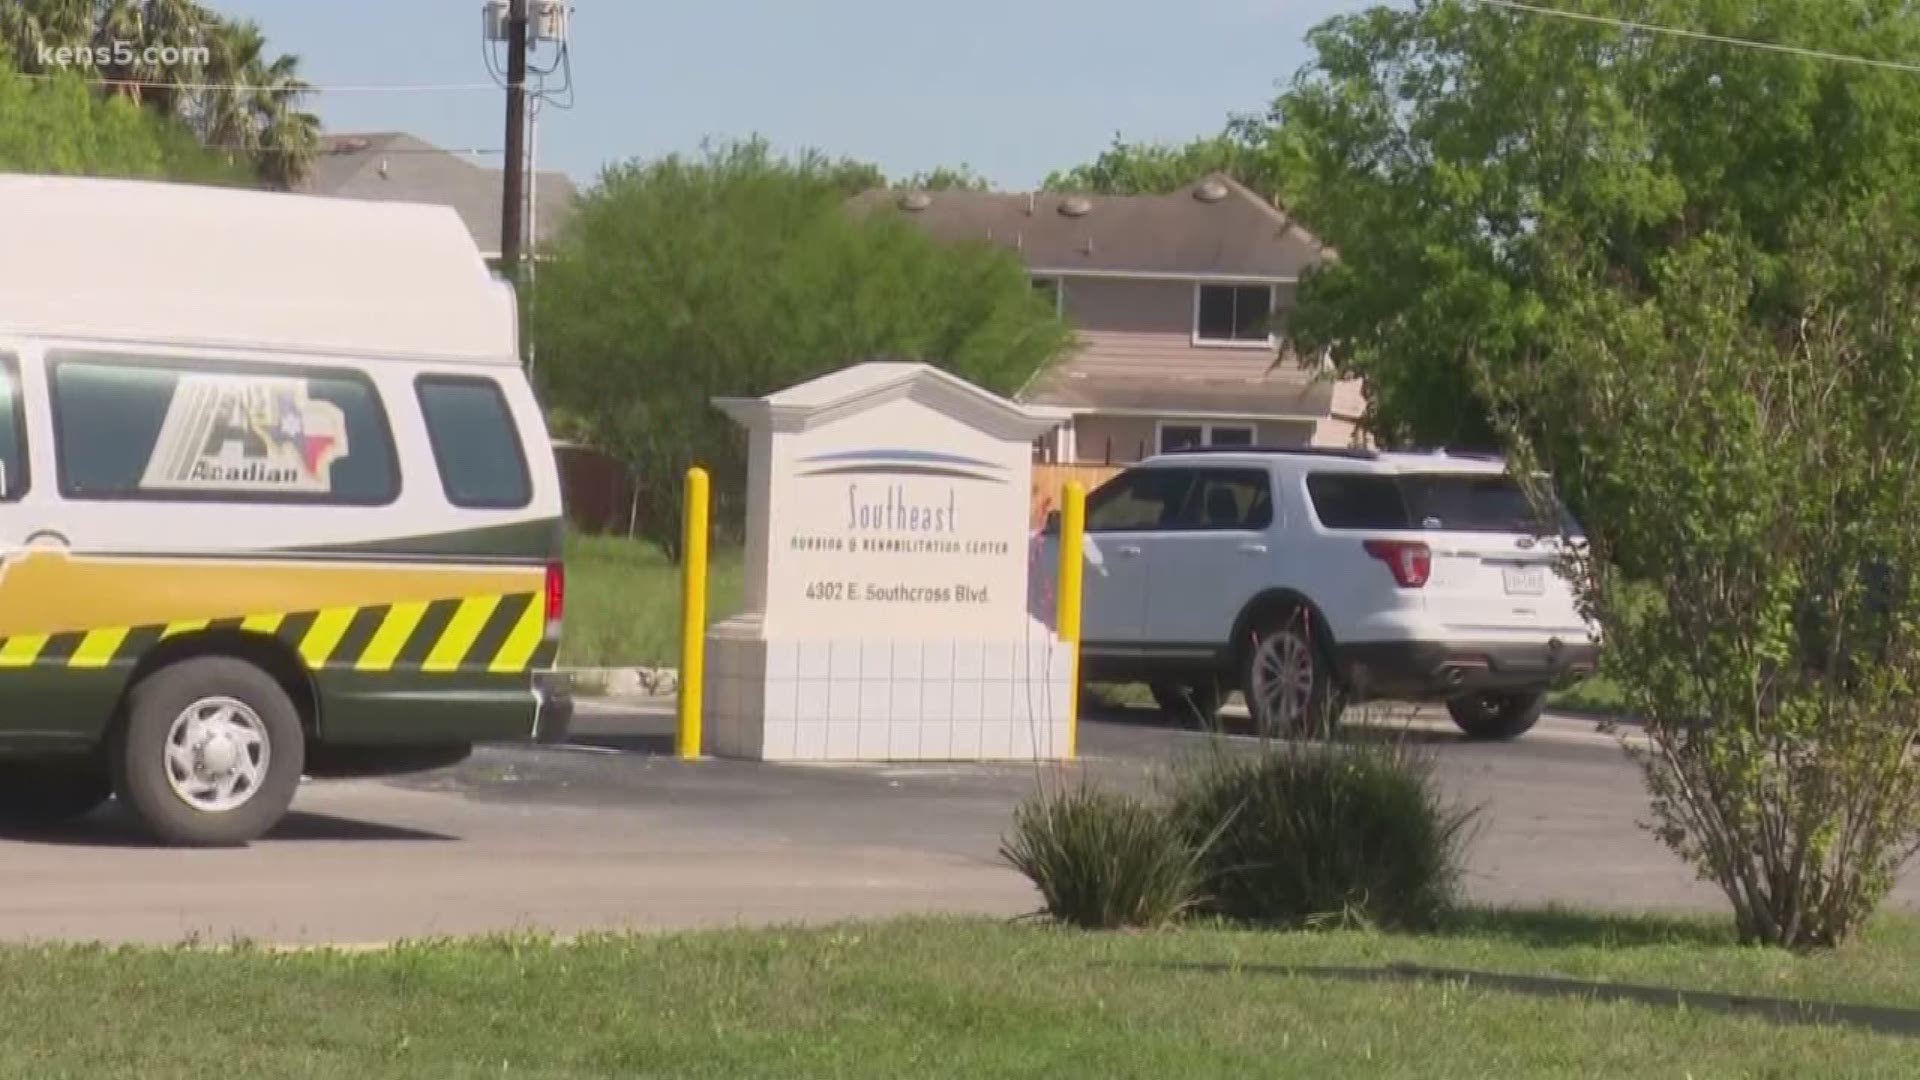 A nurse who worked at the facility fears for her coworkers and patients, saying they were not prepared. Over 100 have tested positive, and 18 residents have died.